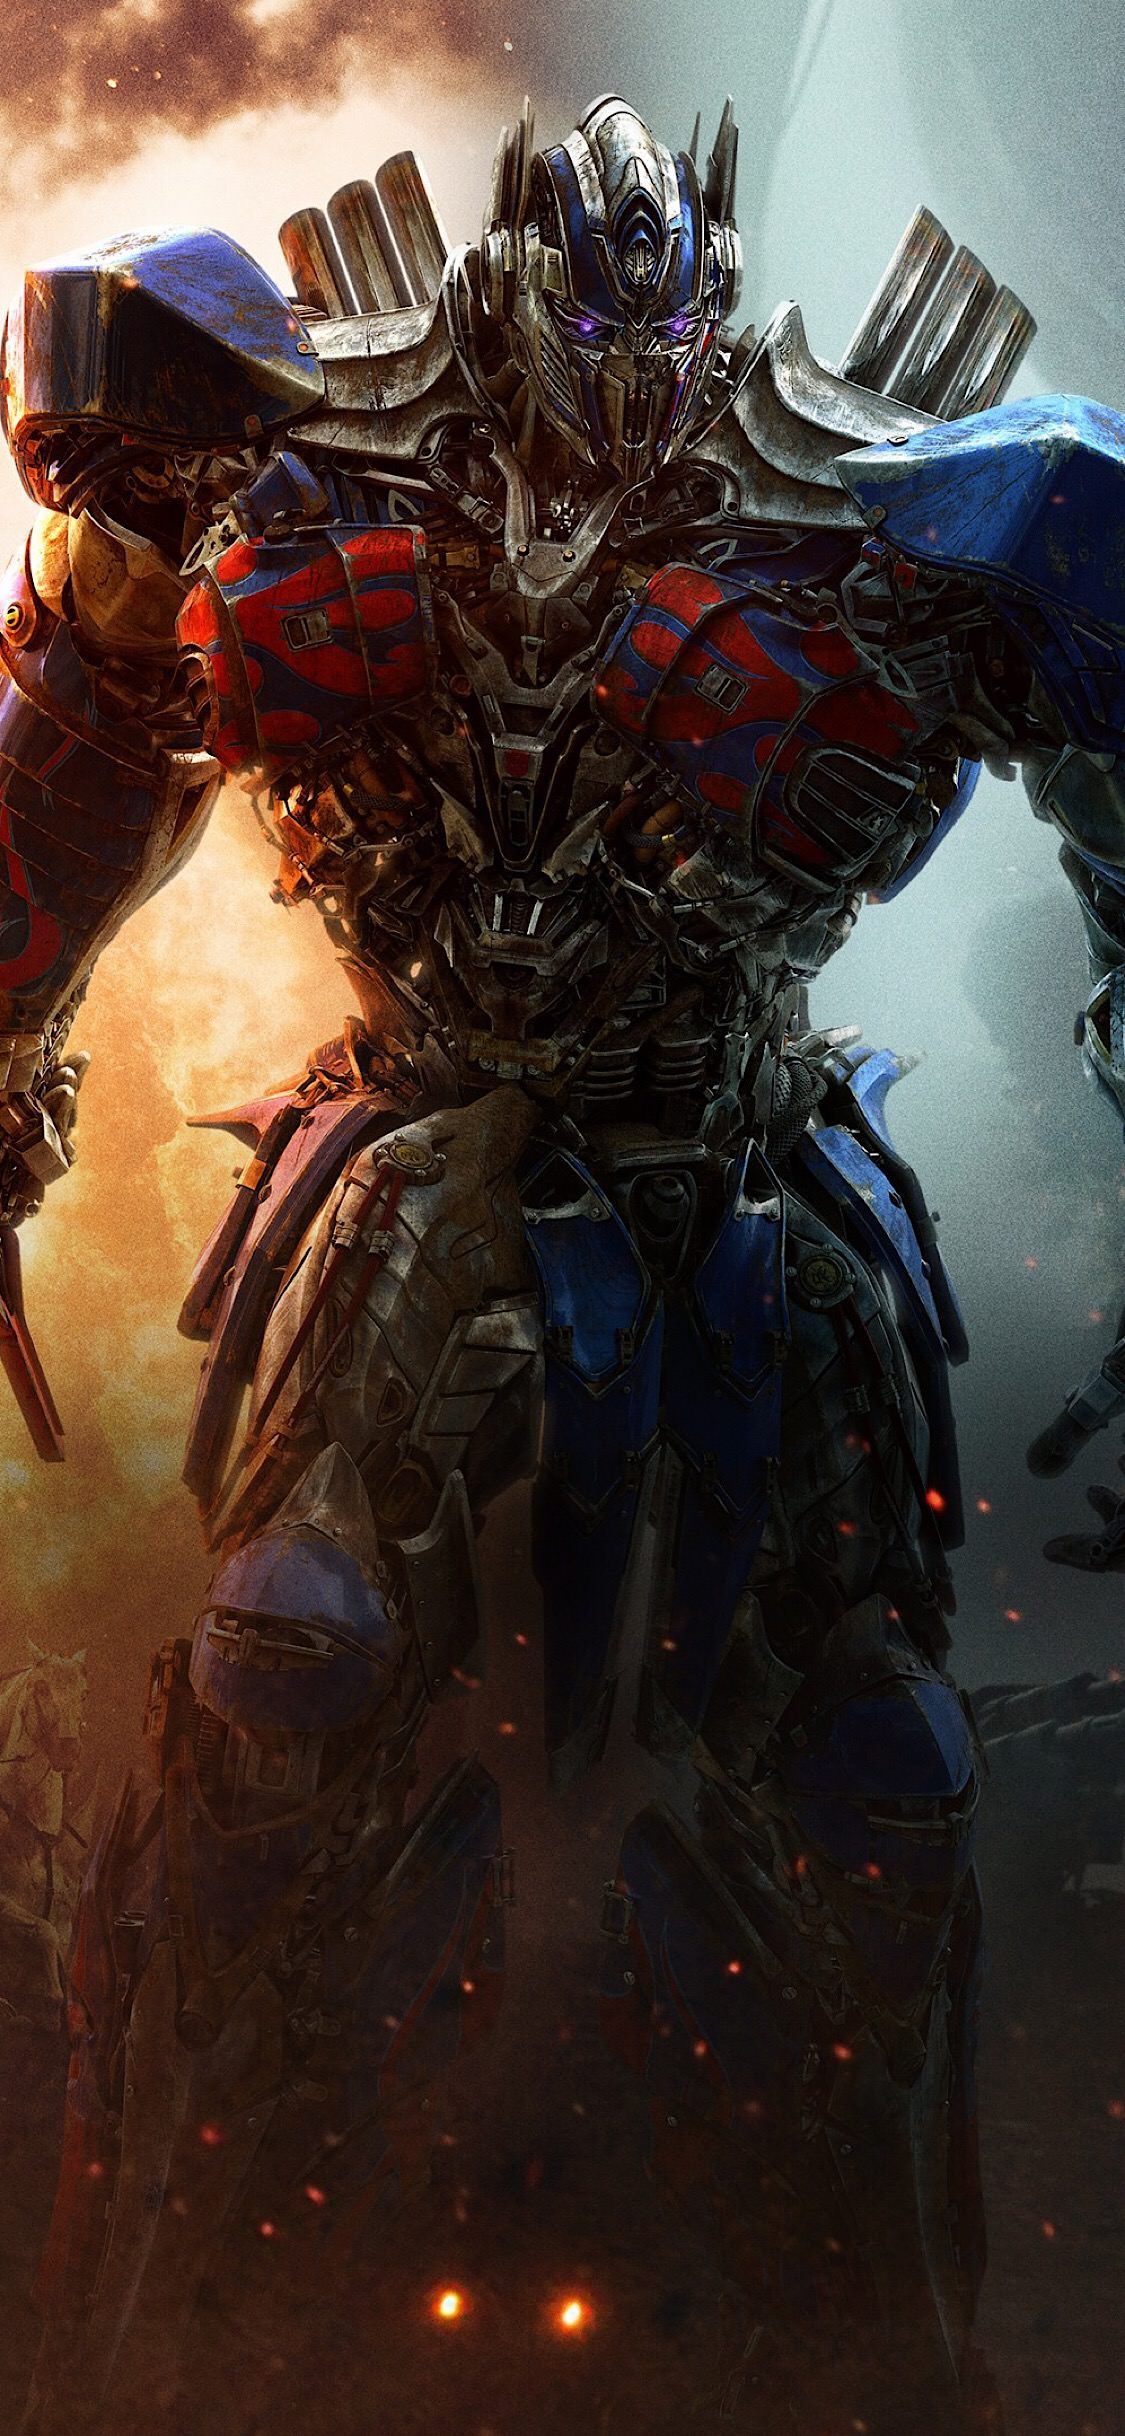 Transformers: The Next Generation, Superheroes, Explosive battles, Iconic franchise, 1130x2440 HD Phone